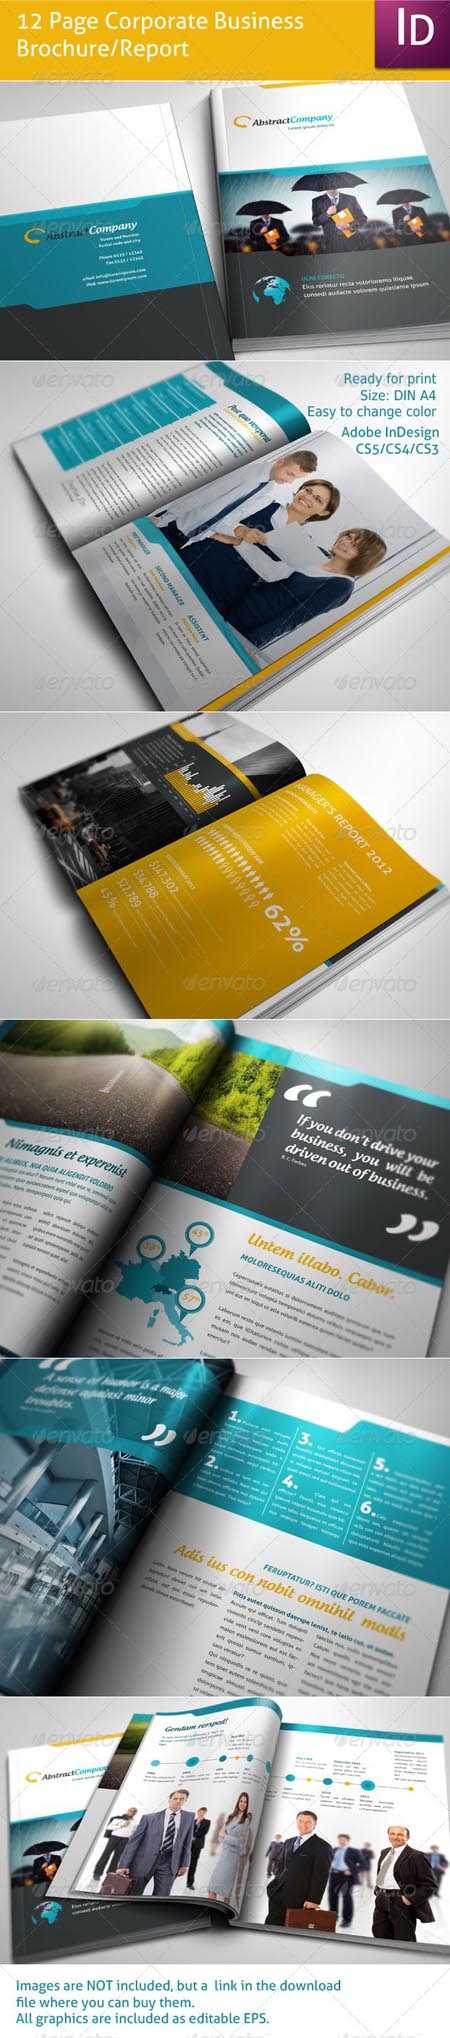 Graphicriver 12 Page Business Brochure Template » Photoshop Inside 12 Page Brochure Template